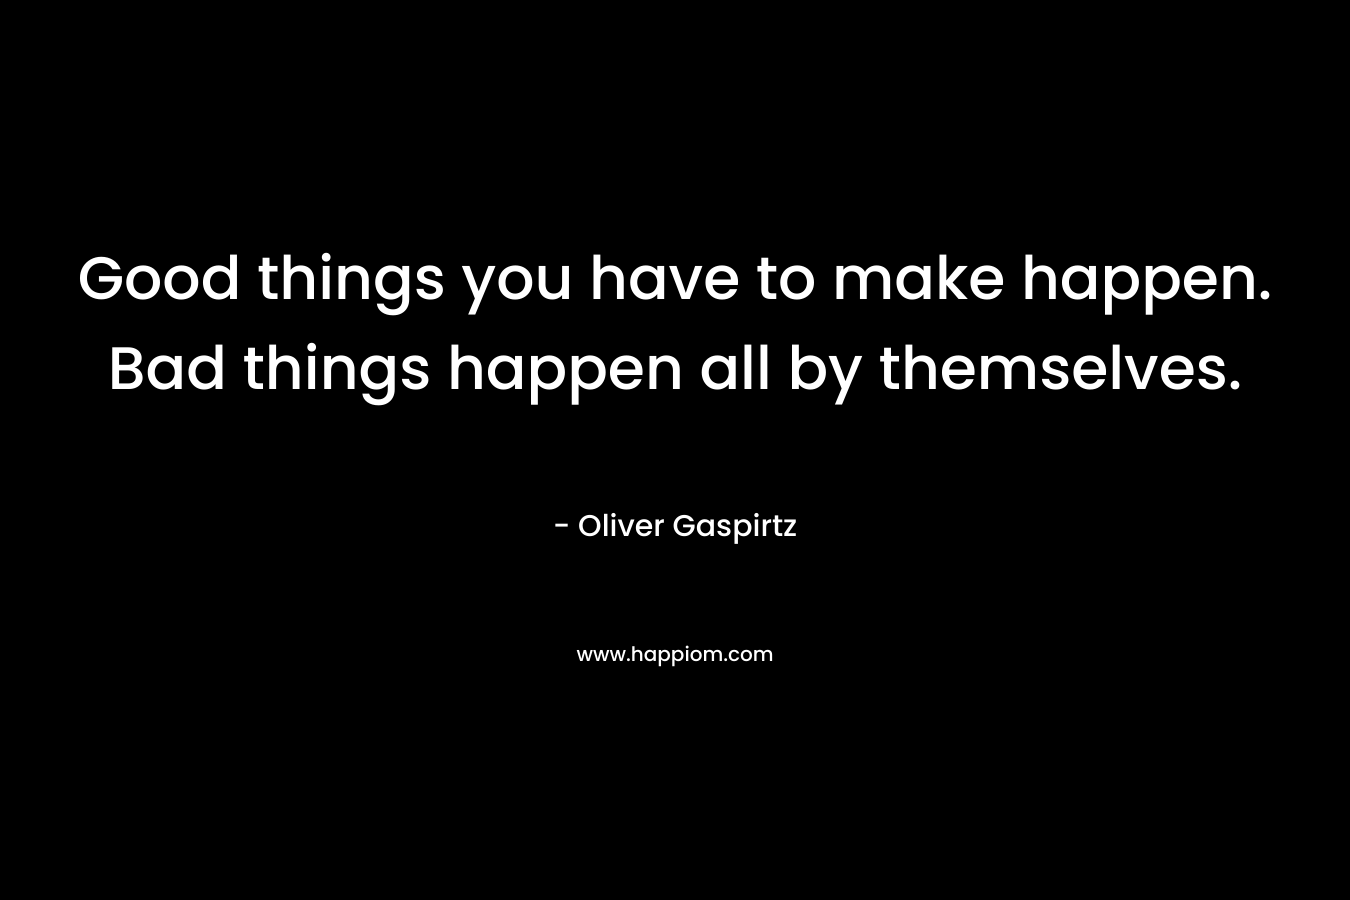 Good things you have to make happen. Bad things happen all by themselves.